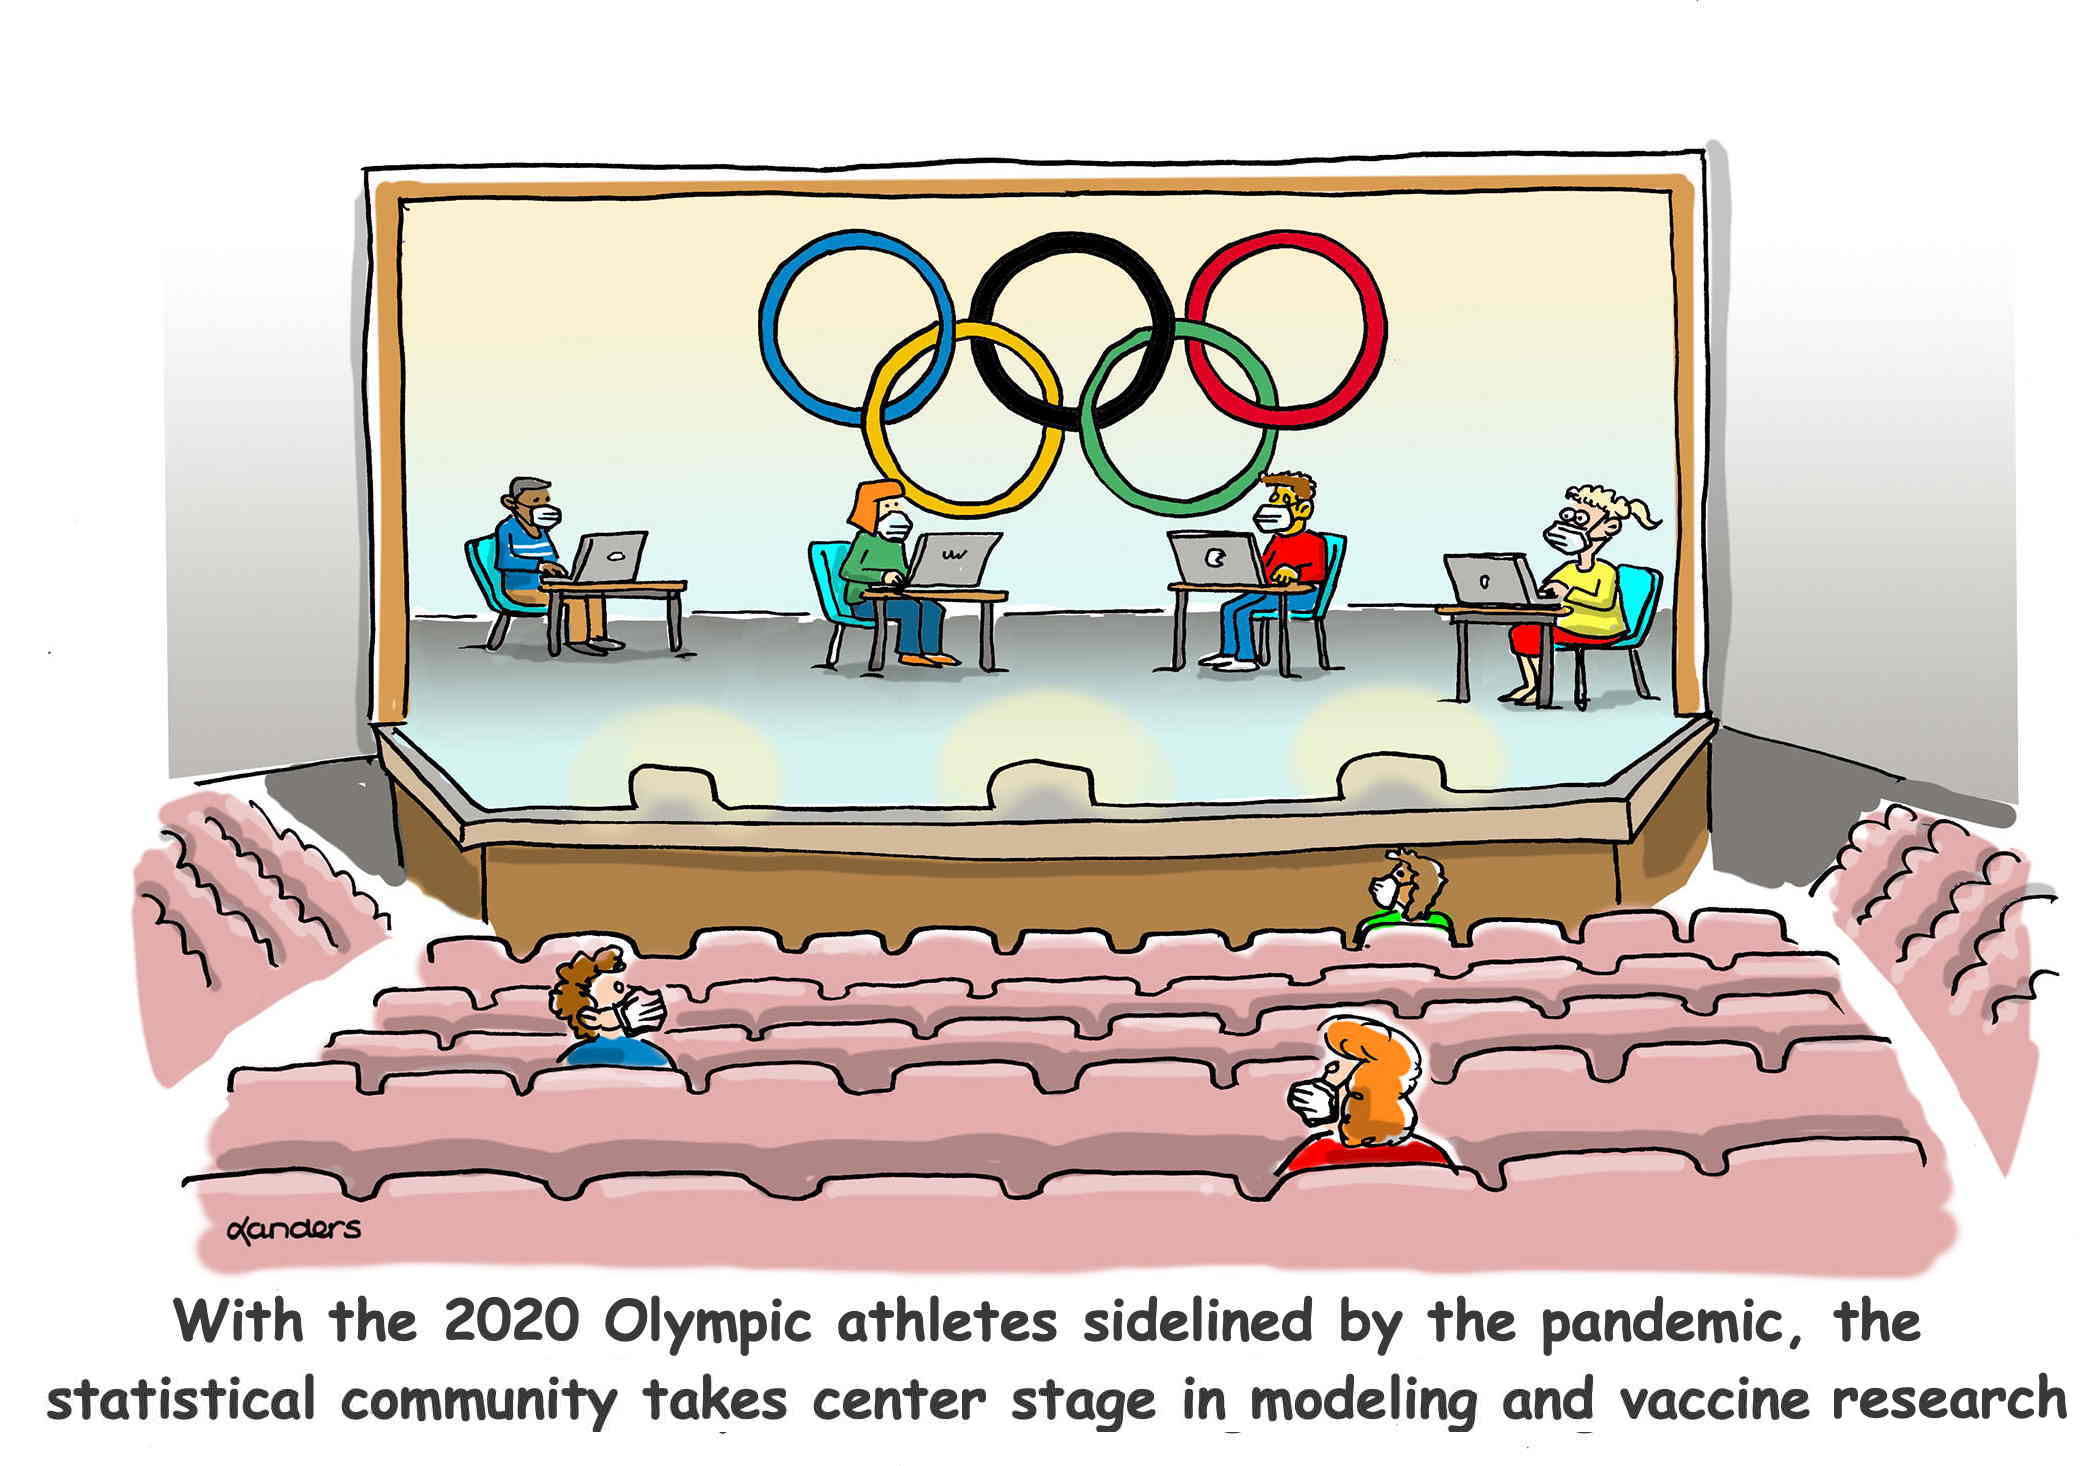 cartoon showing large auditorium with a few people on stage at computers and olympic rings on wall. Caption says: "With the 2020 Olympic athletes sidelined by the pandemic, the statistical community takes center stage in modeling and vaccine research"